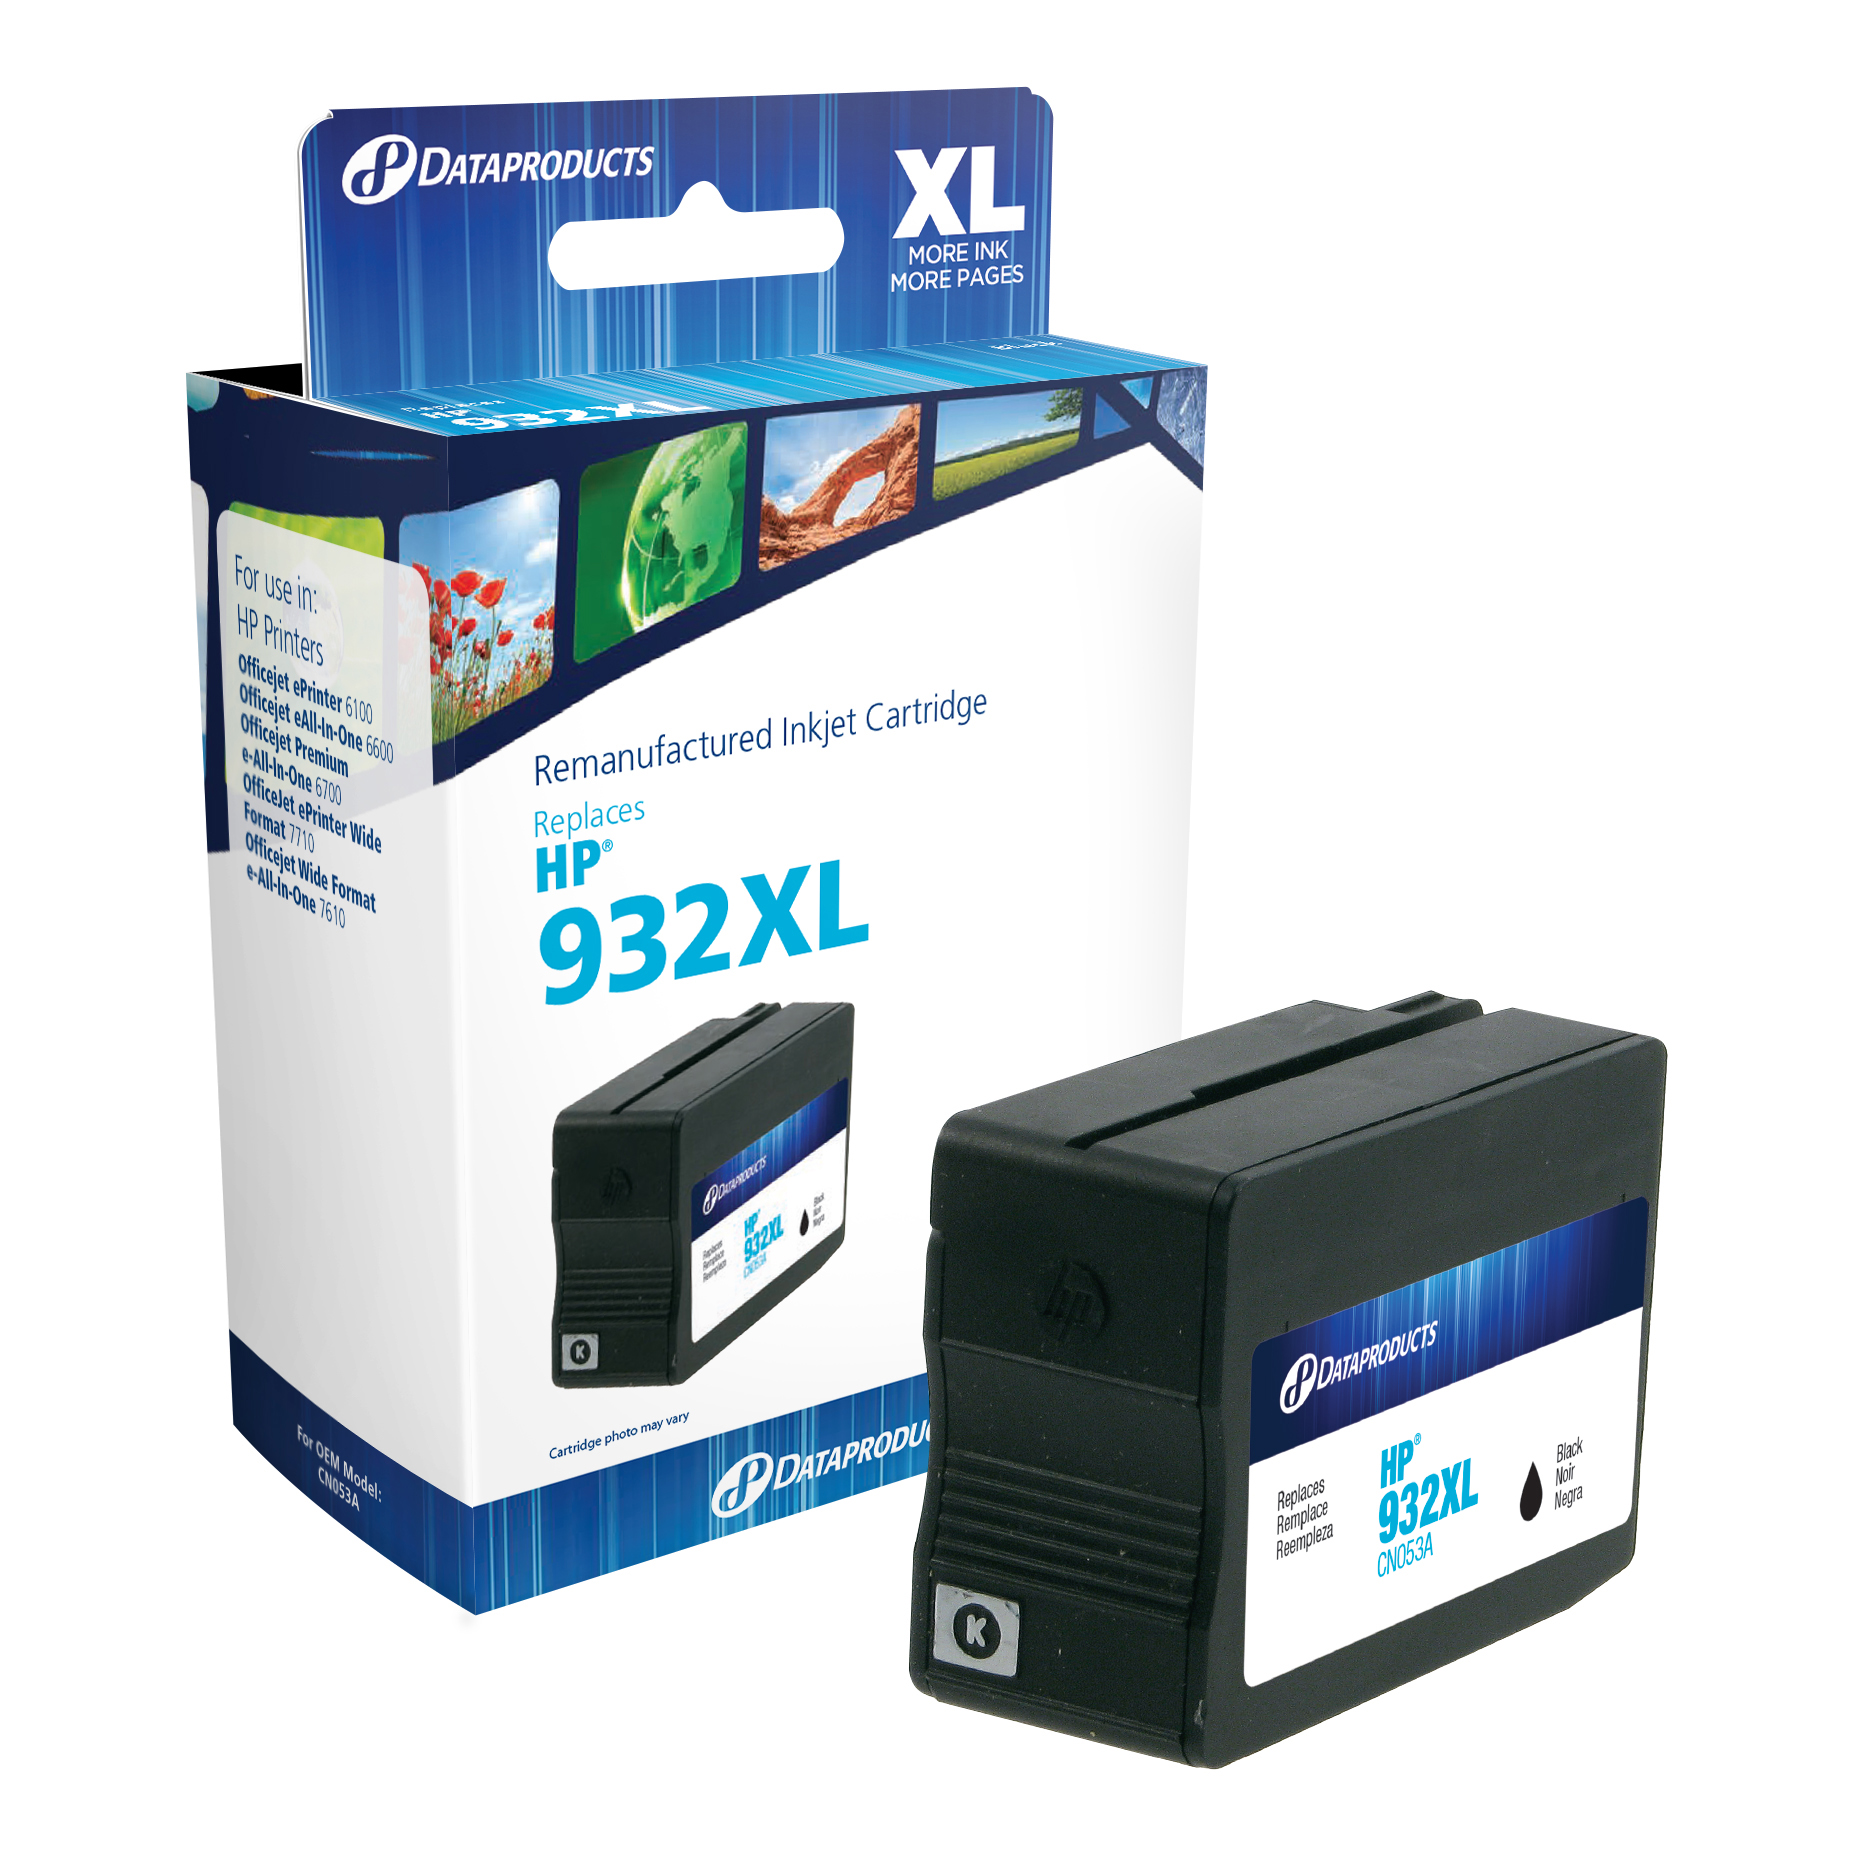 Dataproducts DPC053A Remanufactured Inkjet Cartridge for HP 932XL - High Yield Black Ink